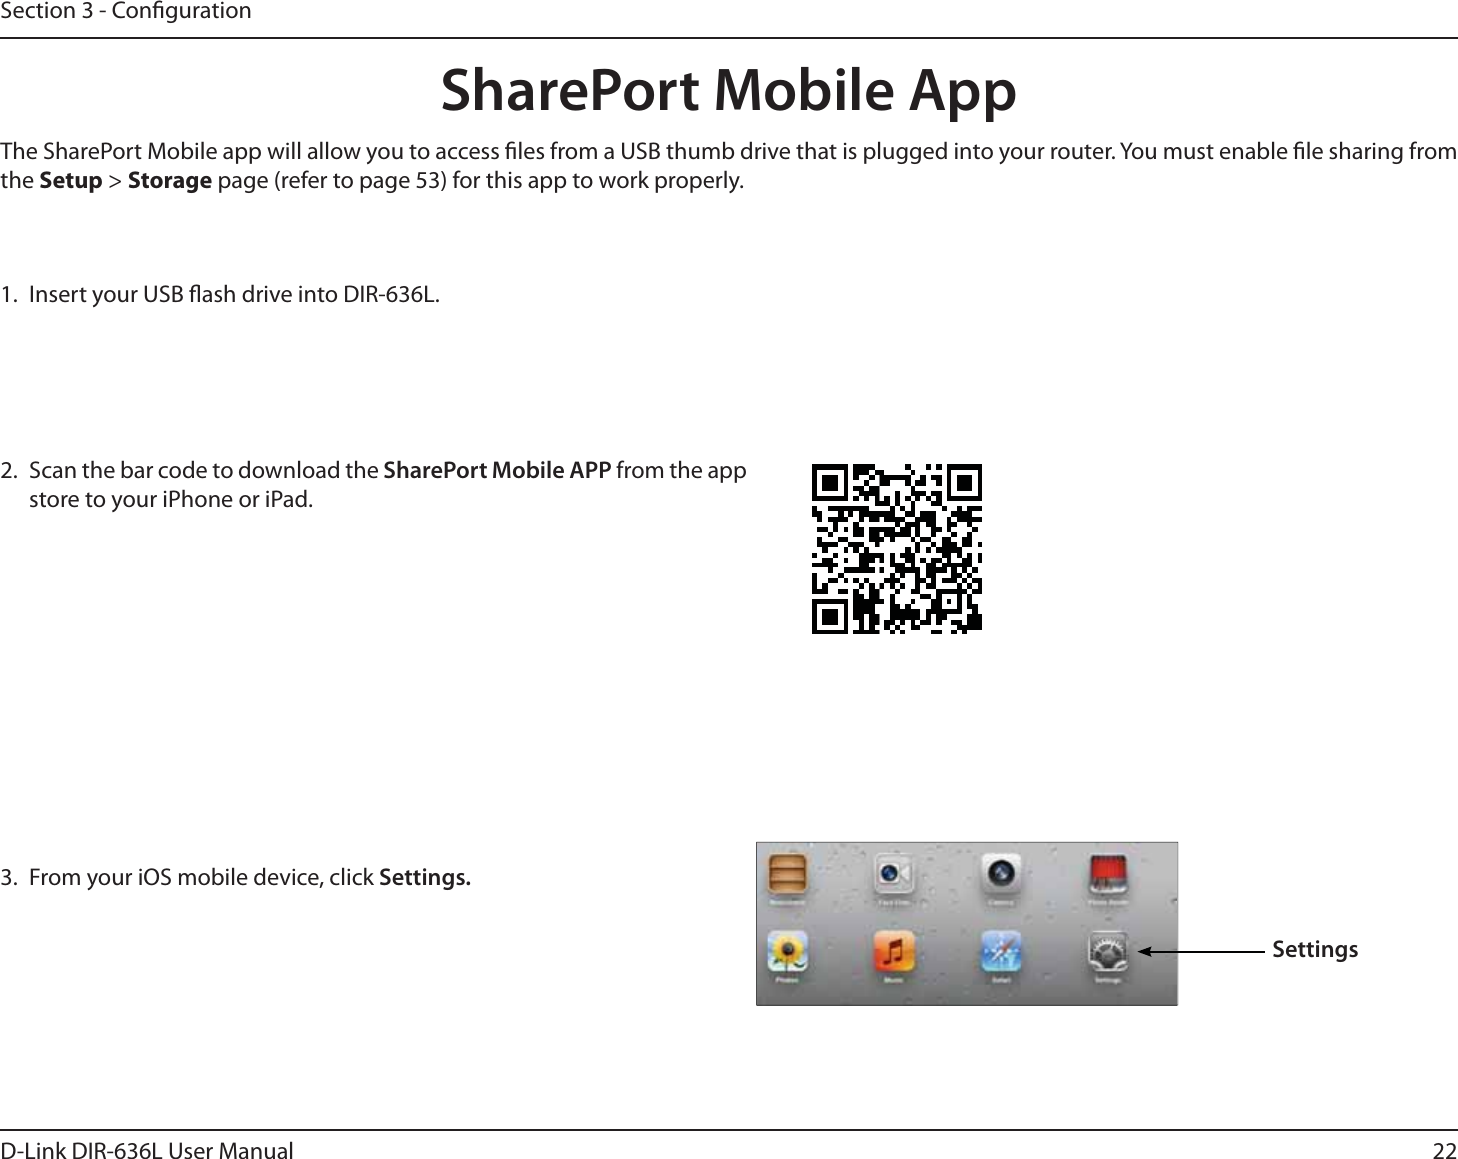 22D-Link DIR-636L User ManualSection 3 - Conguration1.  Insert your USB ash drive into DIR-636L.2.  Scan the bar code to download the SharePort Mobile APP from the app store to your iPhone or iPad.SharePort Mobile App3.  From your iOS mobile device, click Settings. SettingsThe SharePort Mobile app will allow you to access les from a USB thumb drive that is plugged into your router. You must enable le sharing from the Setup &gt; Storage page (refer to page 53) for this app to work properly.